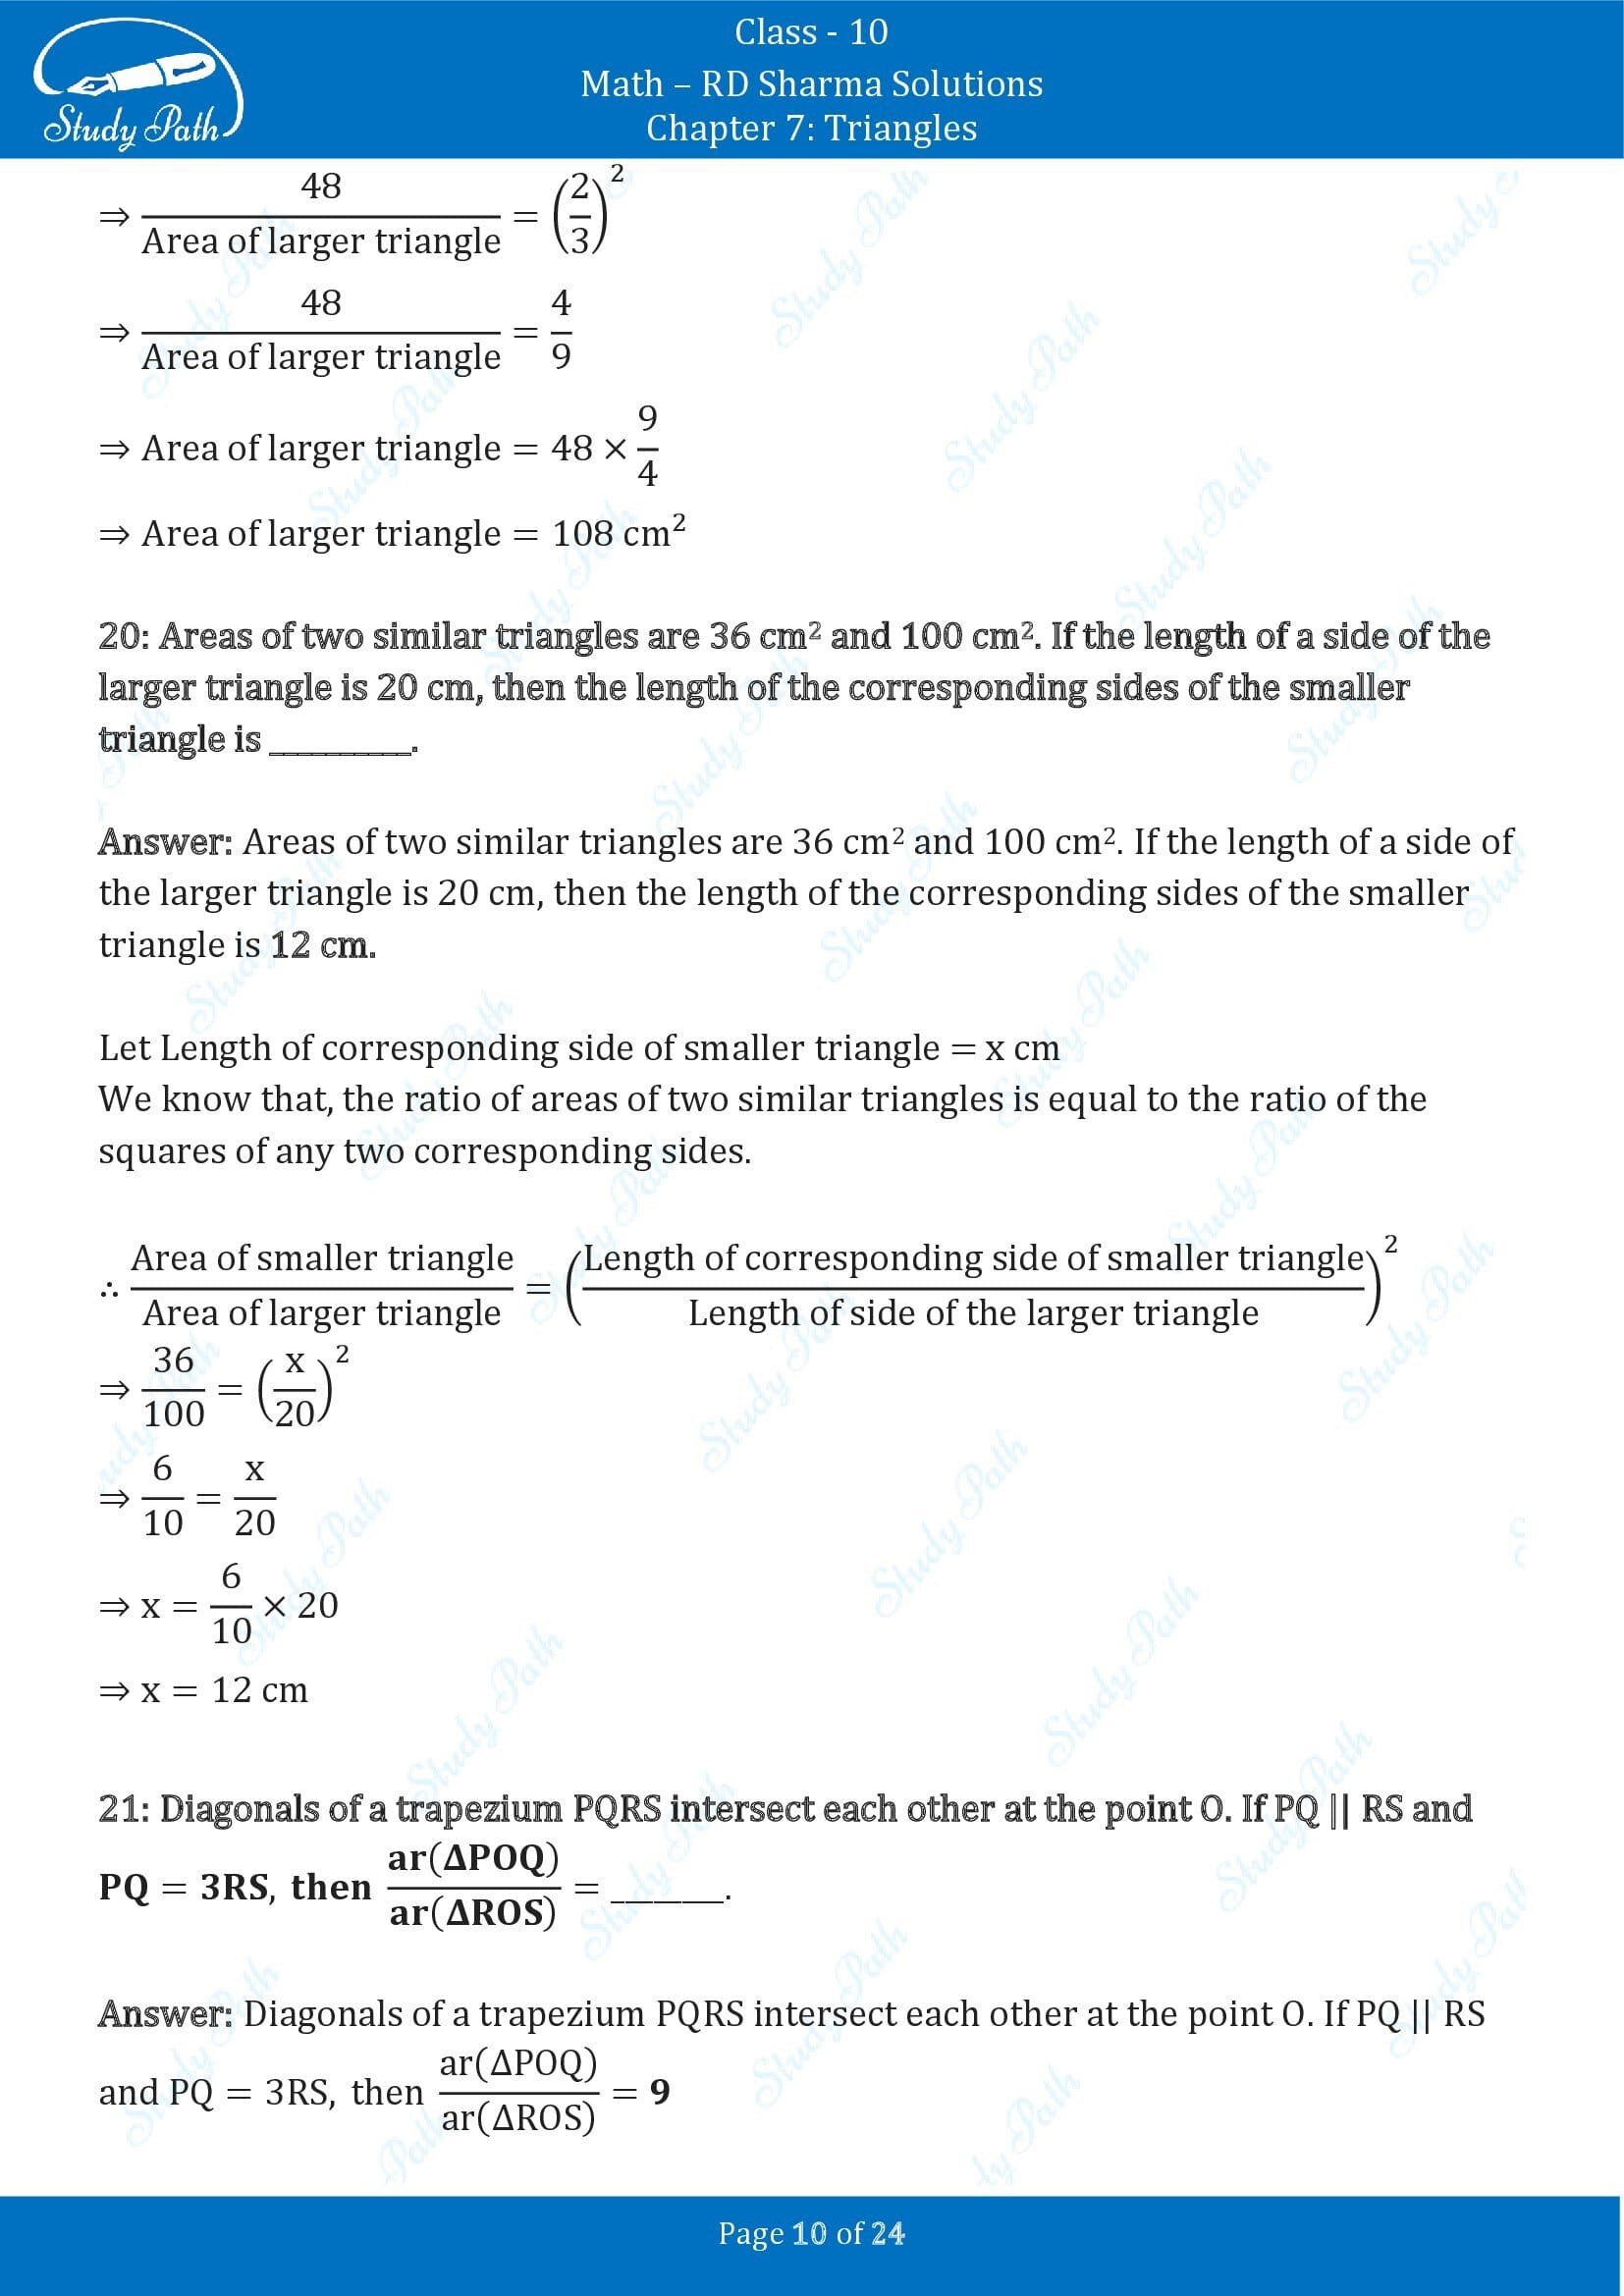 RD Sharma Solutions Class 10 Chapter 7 Triangles Fill in the Blank Type Questions FBQs 00010